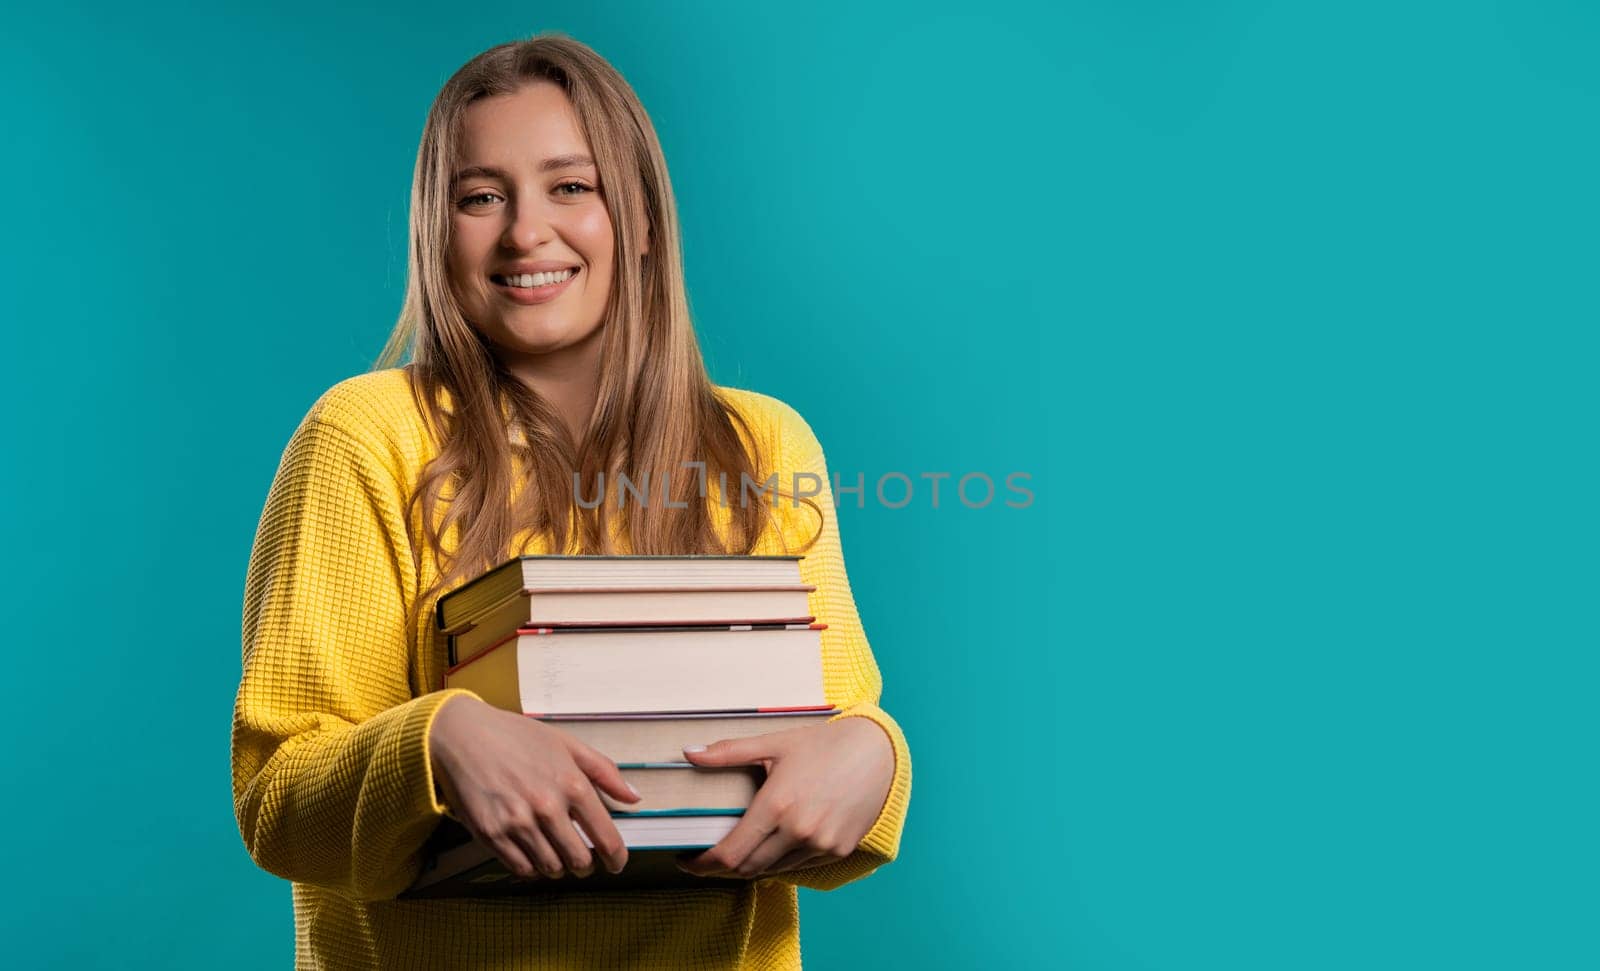 Happy student woman with stack books from library, blue background. Copy space by kristina_kokhanova